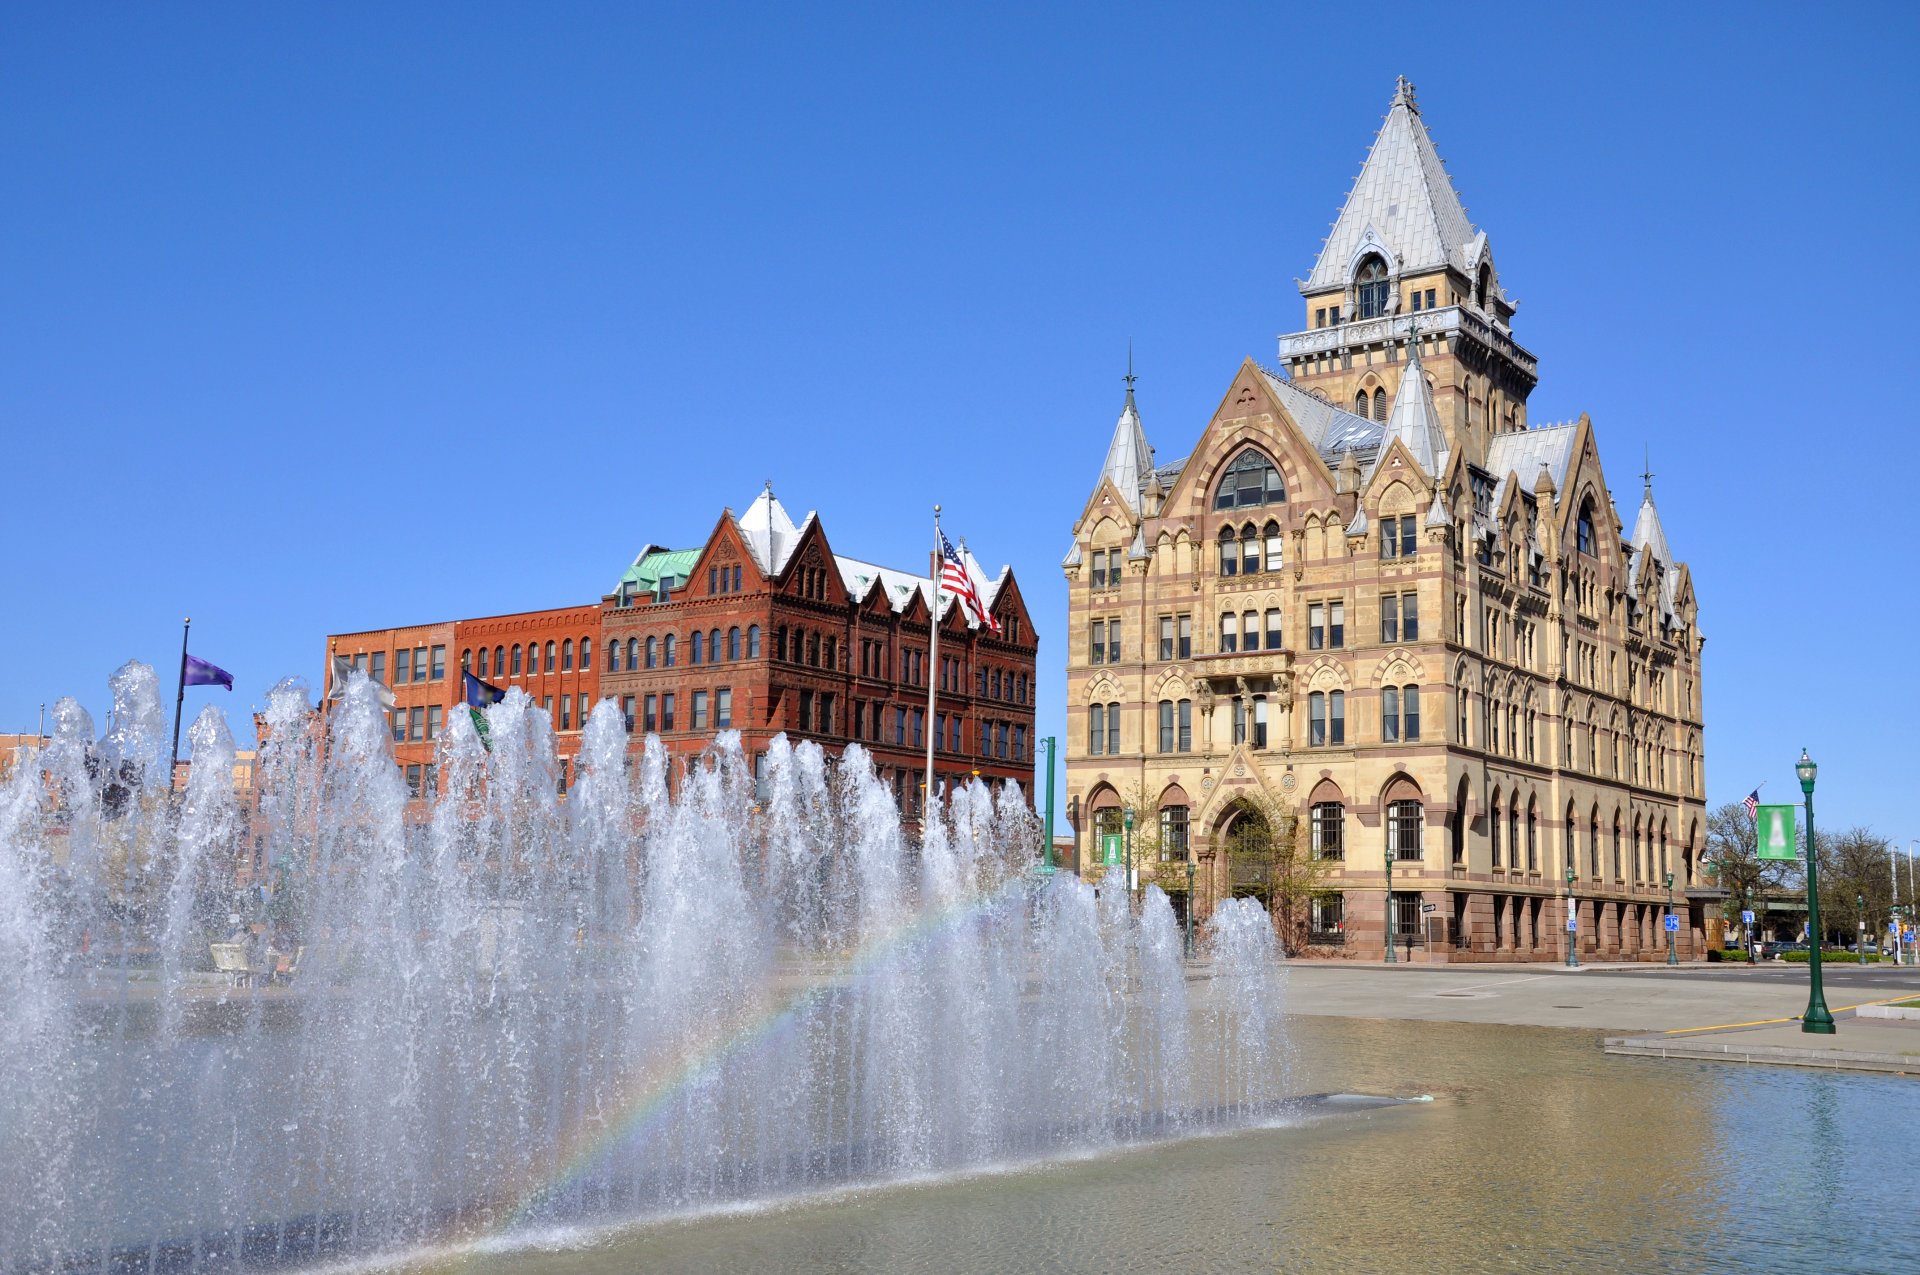 Syracuse's Clinton Square with Fountains